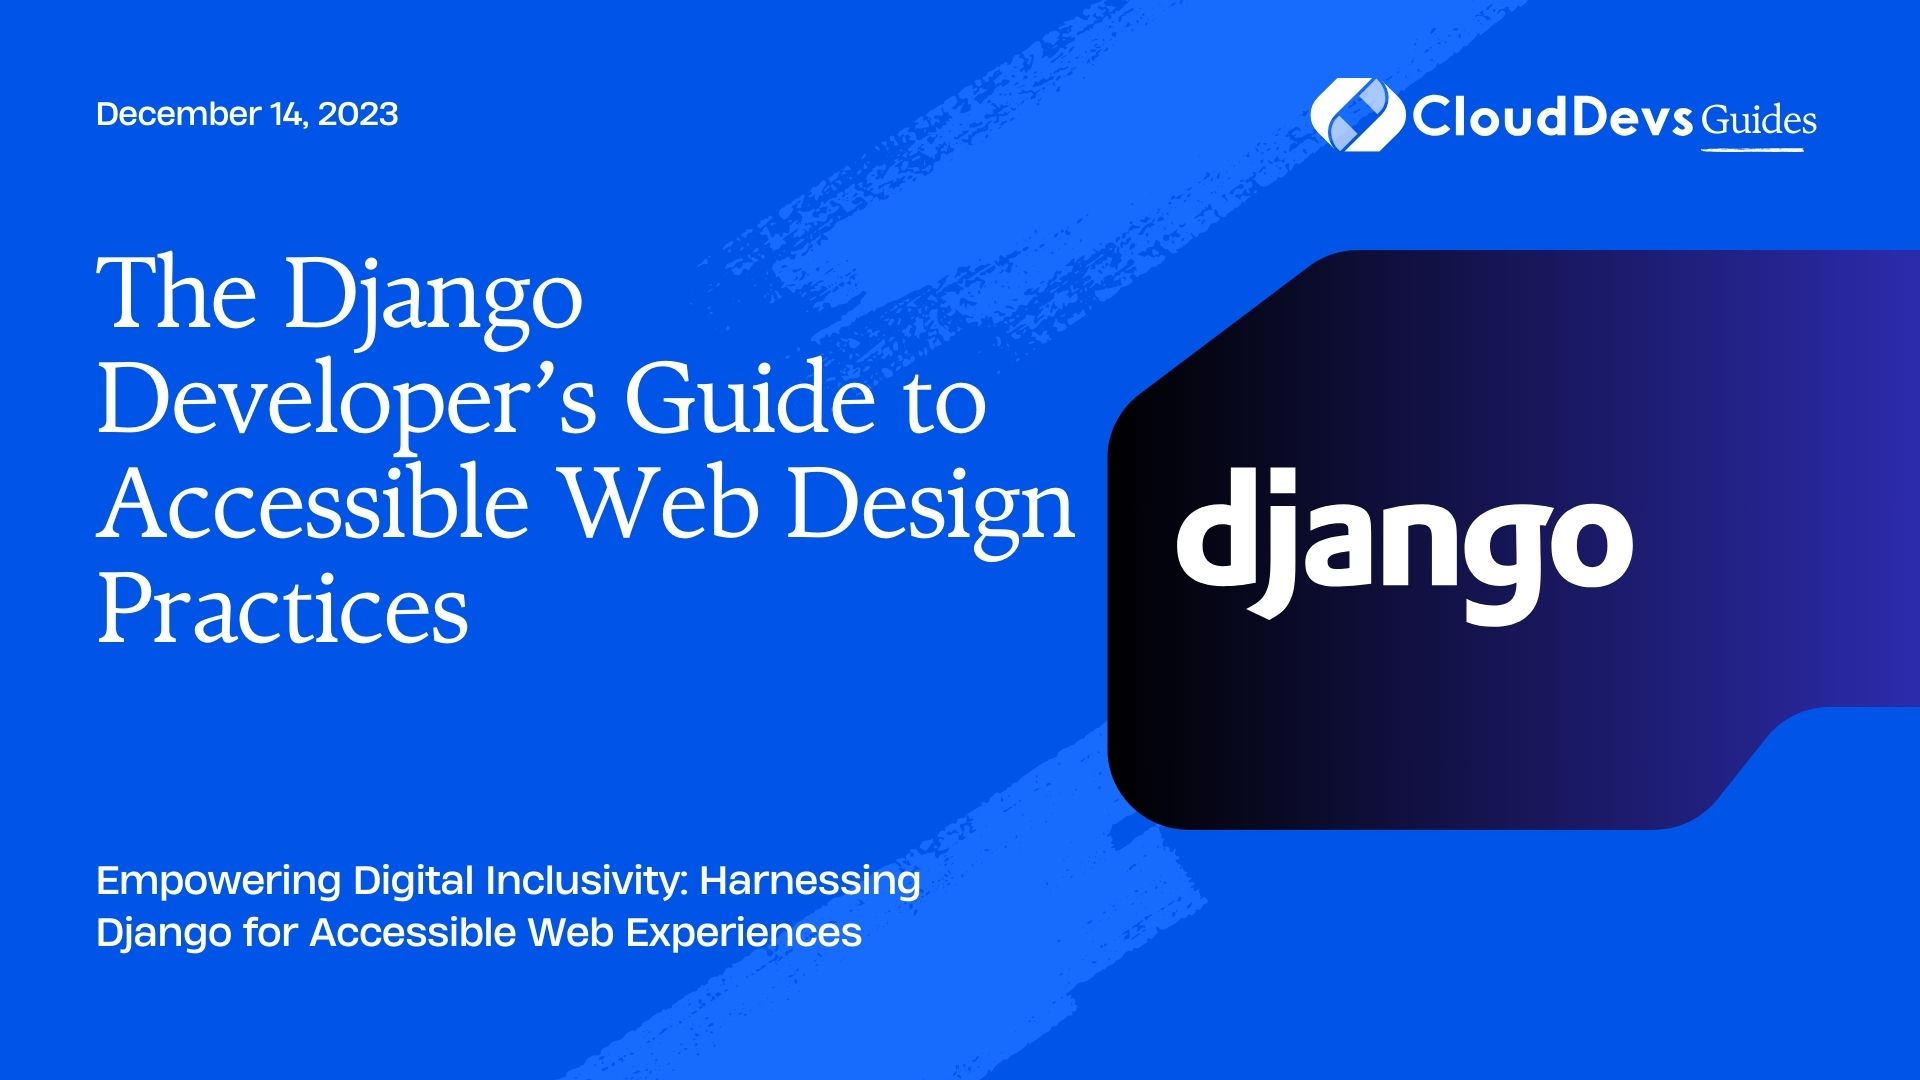 The Django Developer’s Guide to Accessible Web Design Practices